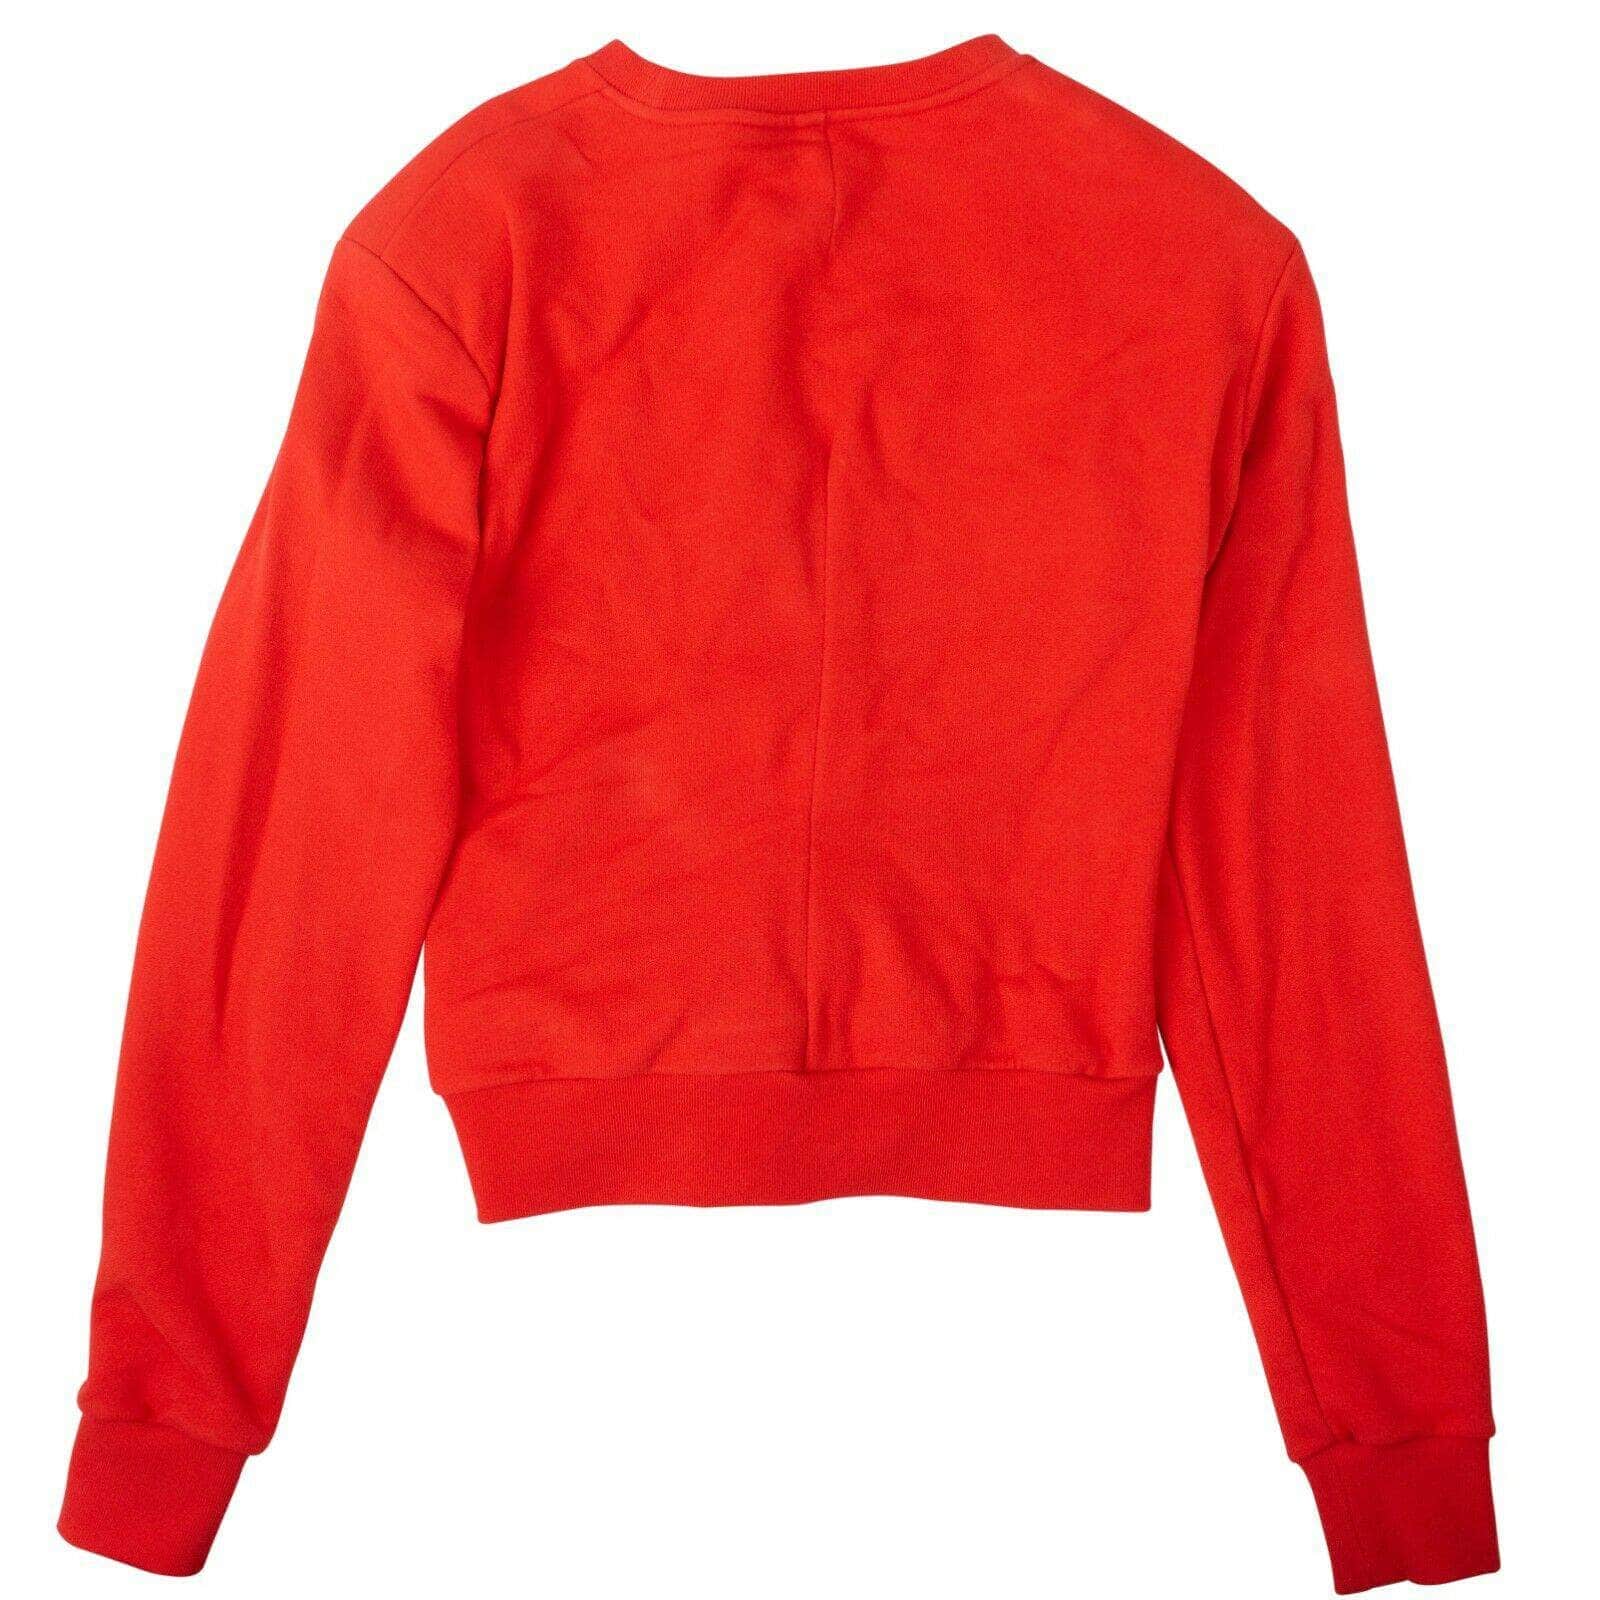 Unravel Project channelenable-all, chicmi, couponcollection, gender-womens, main-clothing, size-m, size-s, size-xs, under-250, unravel-project, womens-crewneck-sweaters S Red Folded Detail Sweater 82NGG-UN-1081/S 82NGG-UN-1081/S